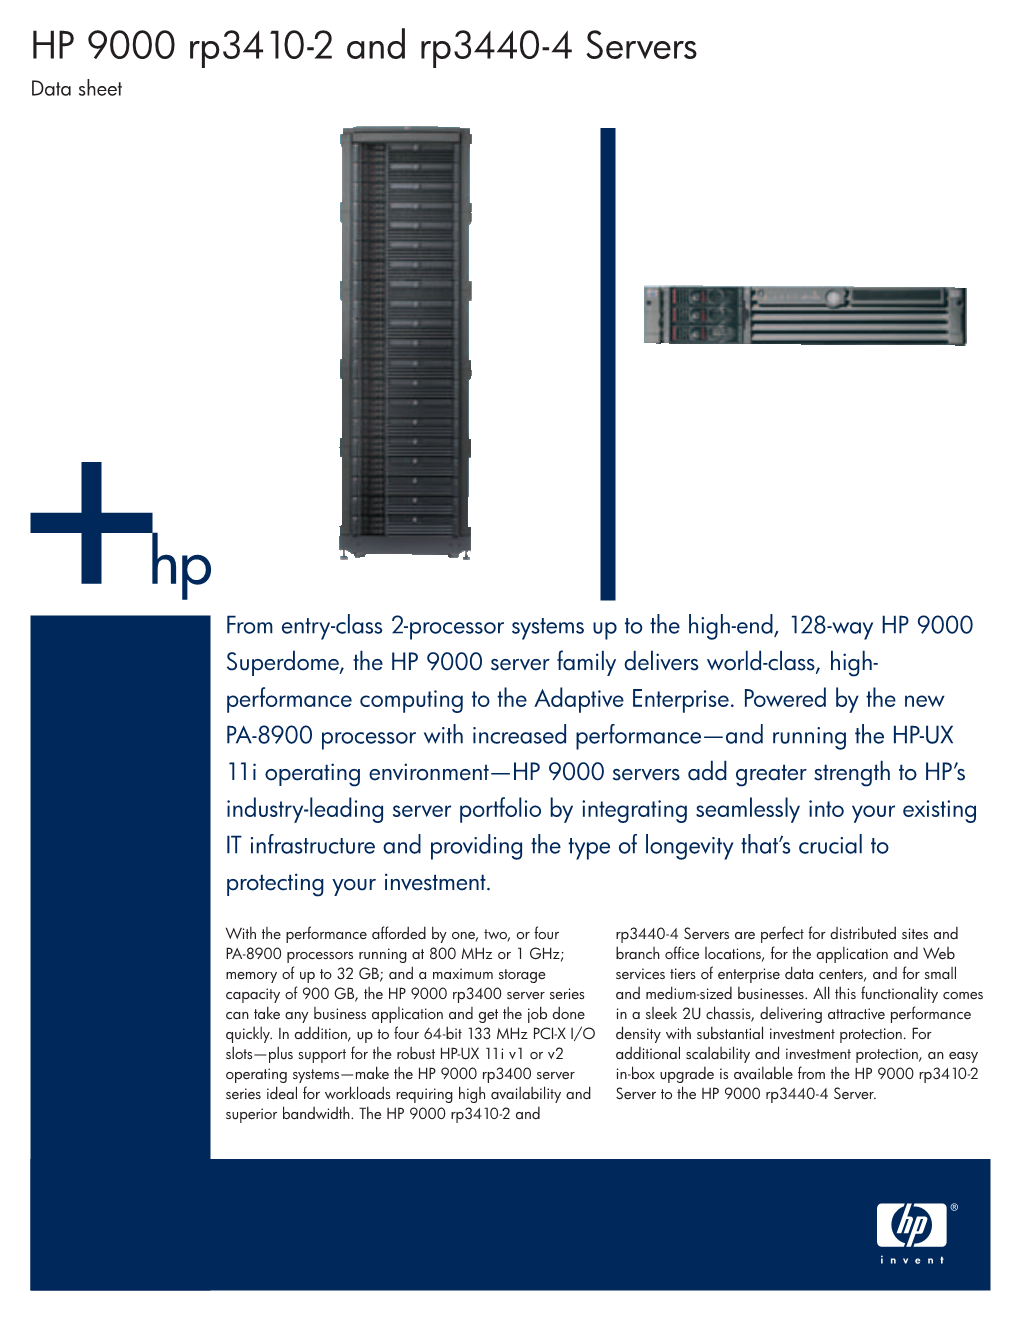 HP 9000 Rp3410-2 and Rp3440-4 Servers Data Sheet